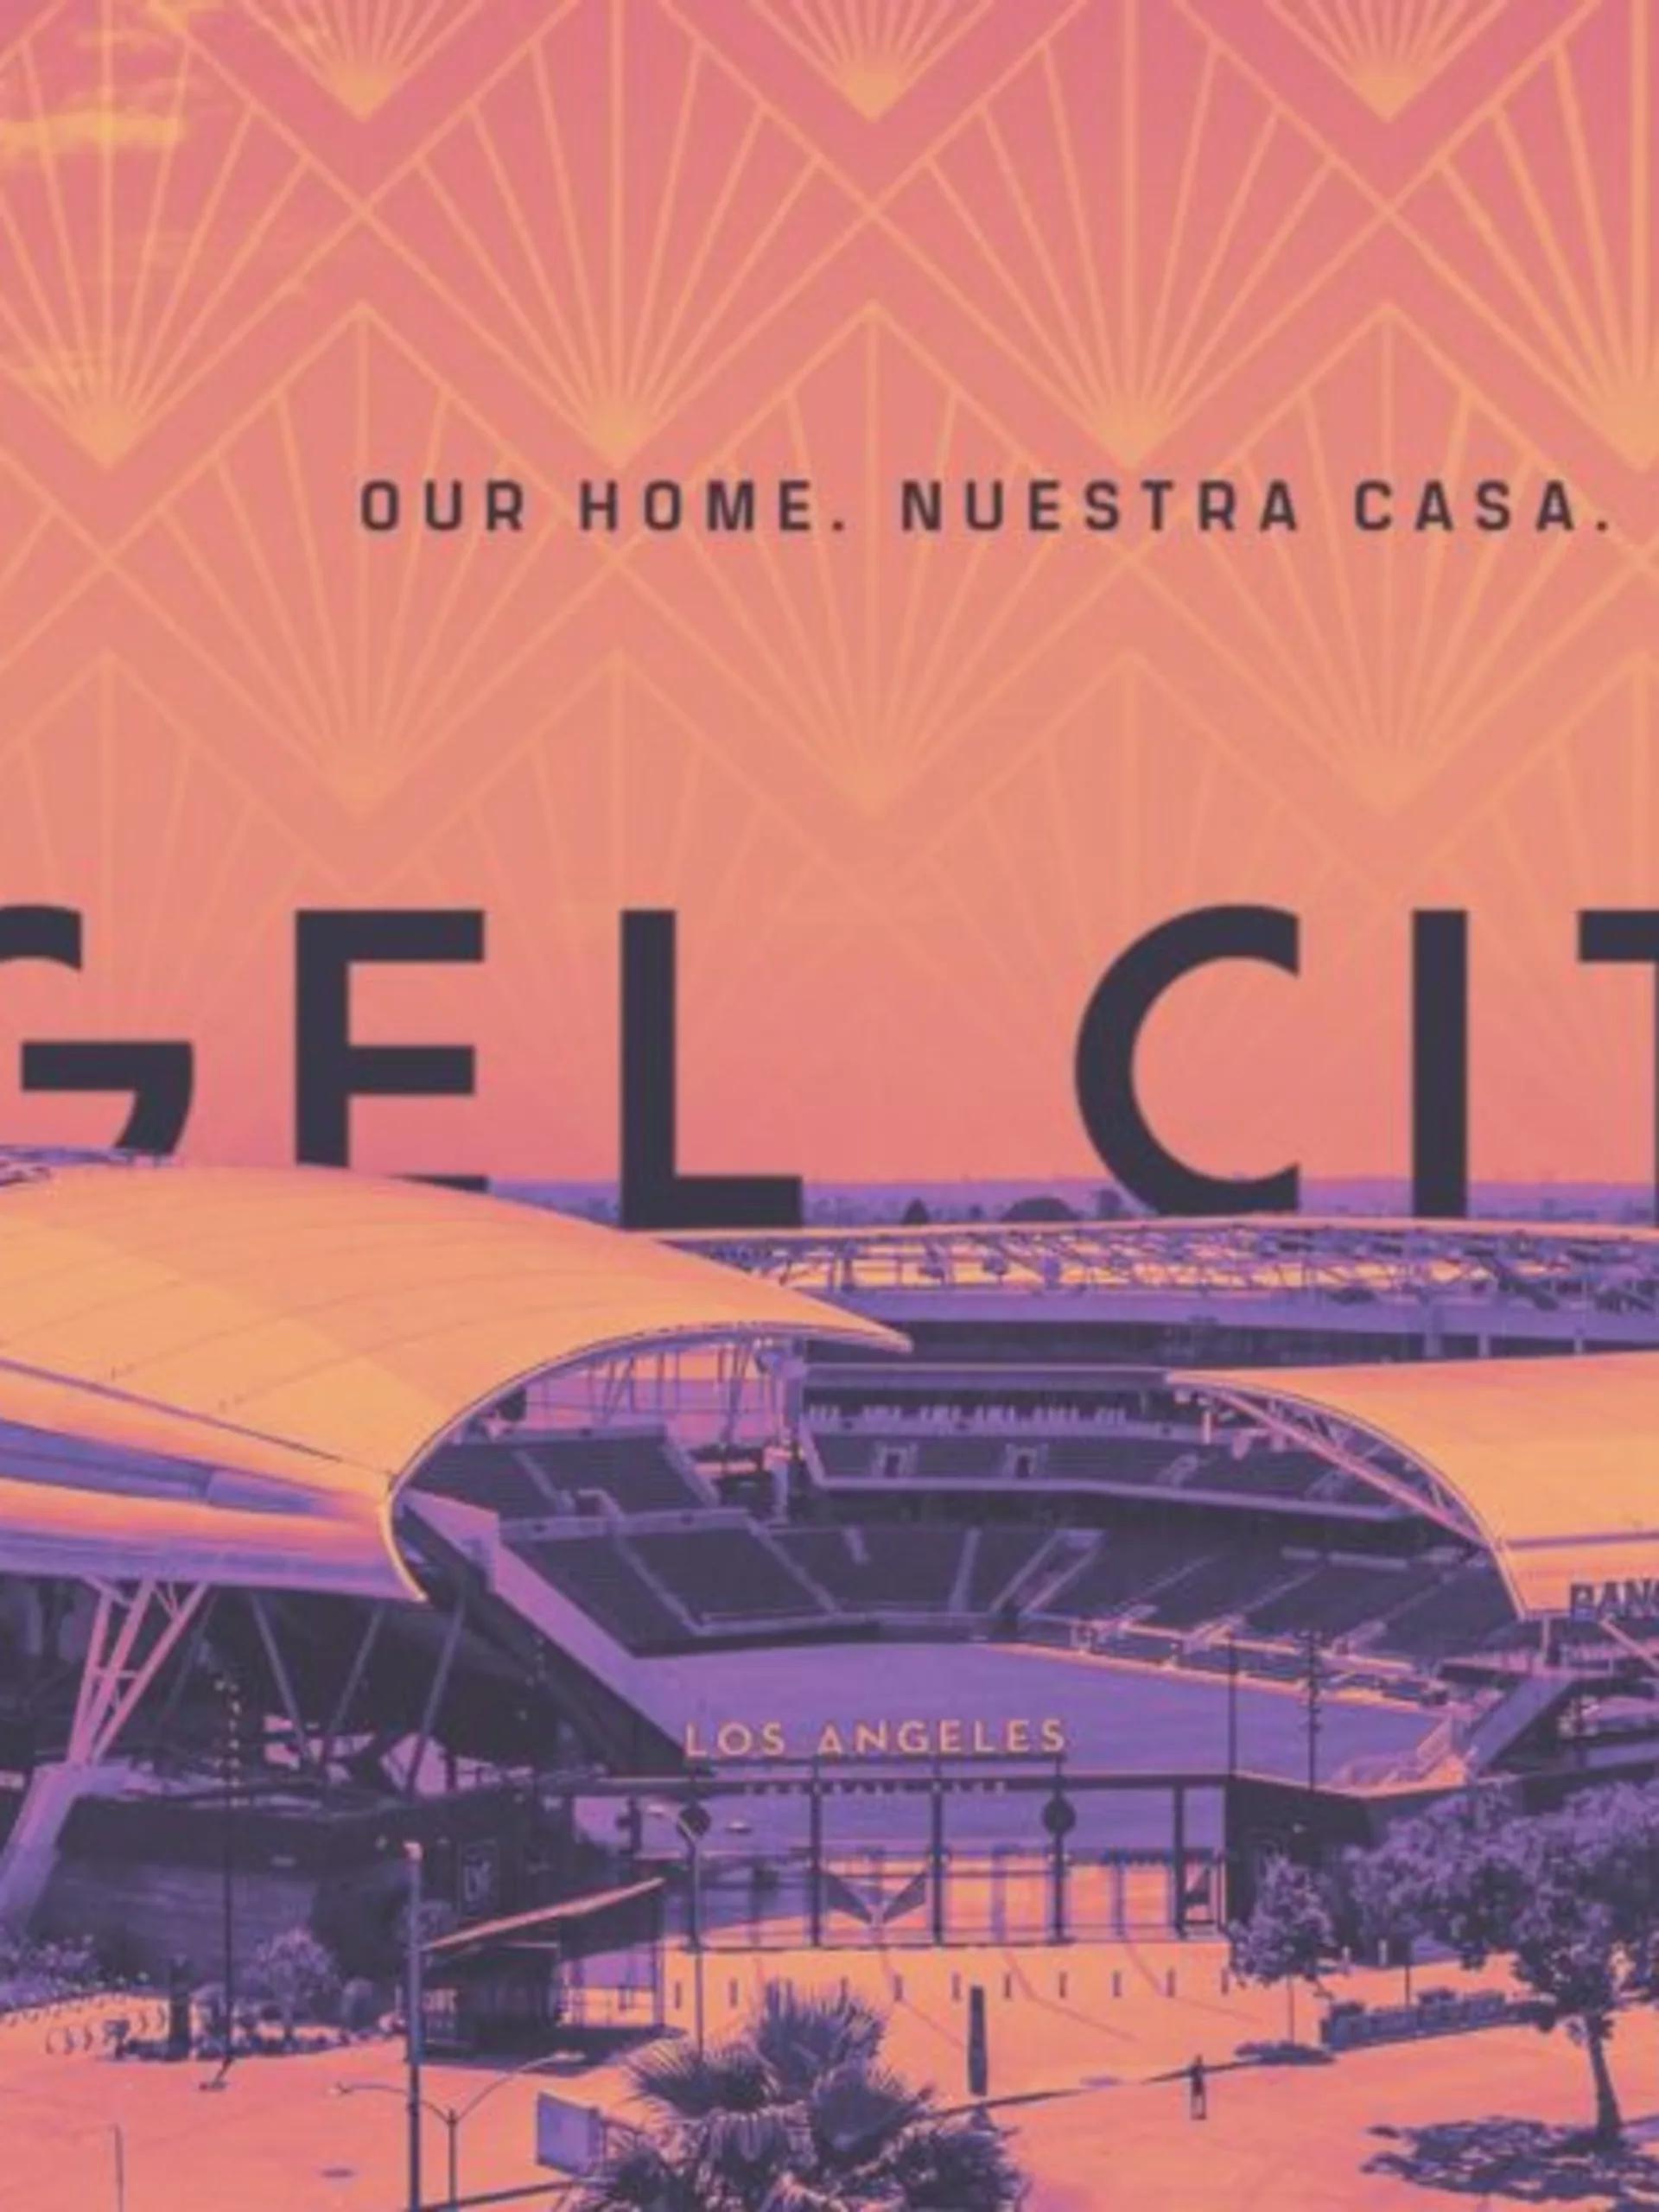 story-image-angel-city-football-club-to-play-at-banc-of-california-stadium-in-downtown-la